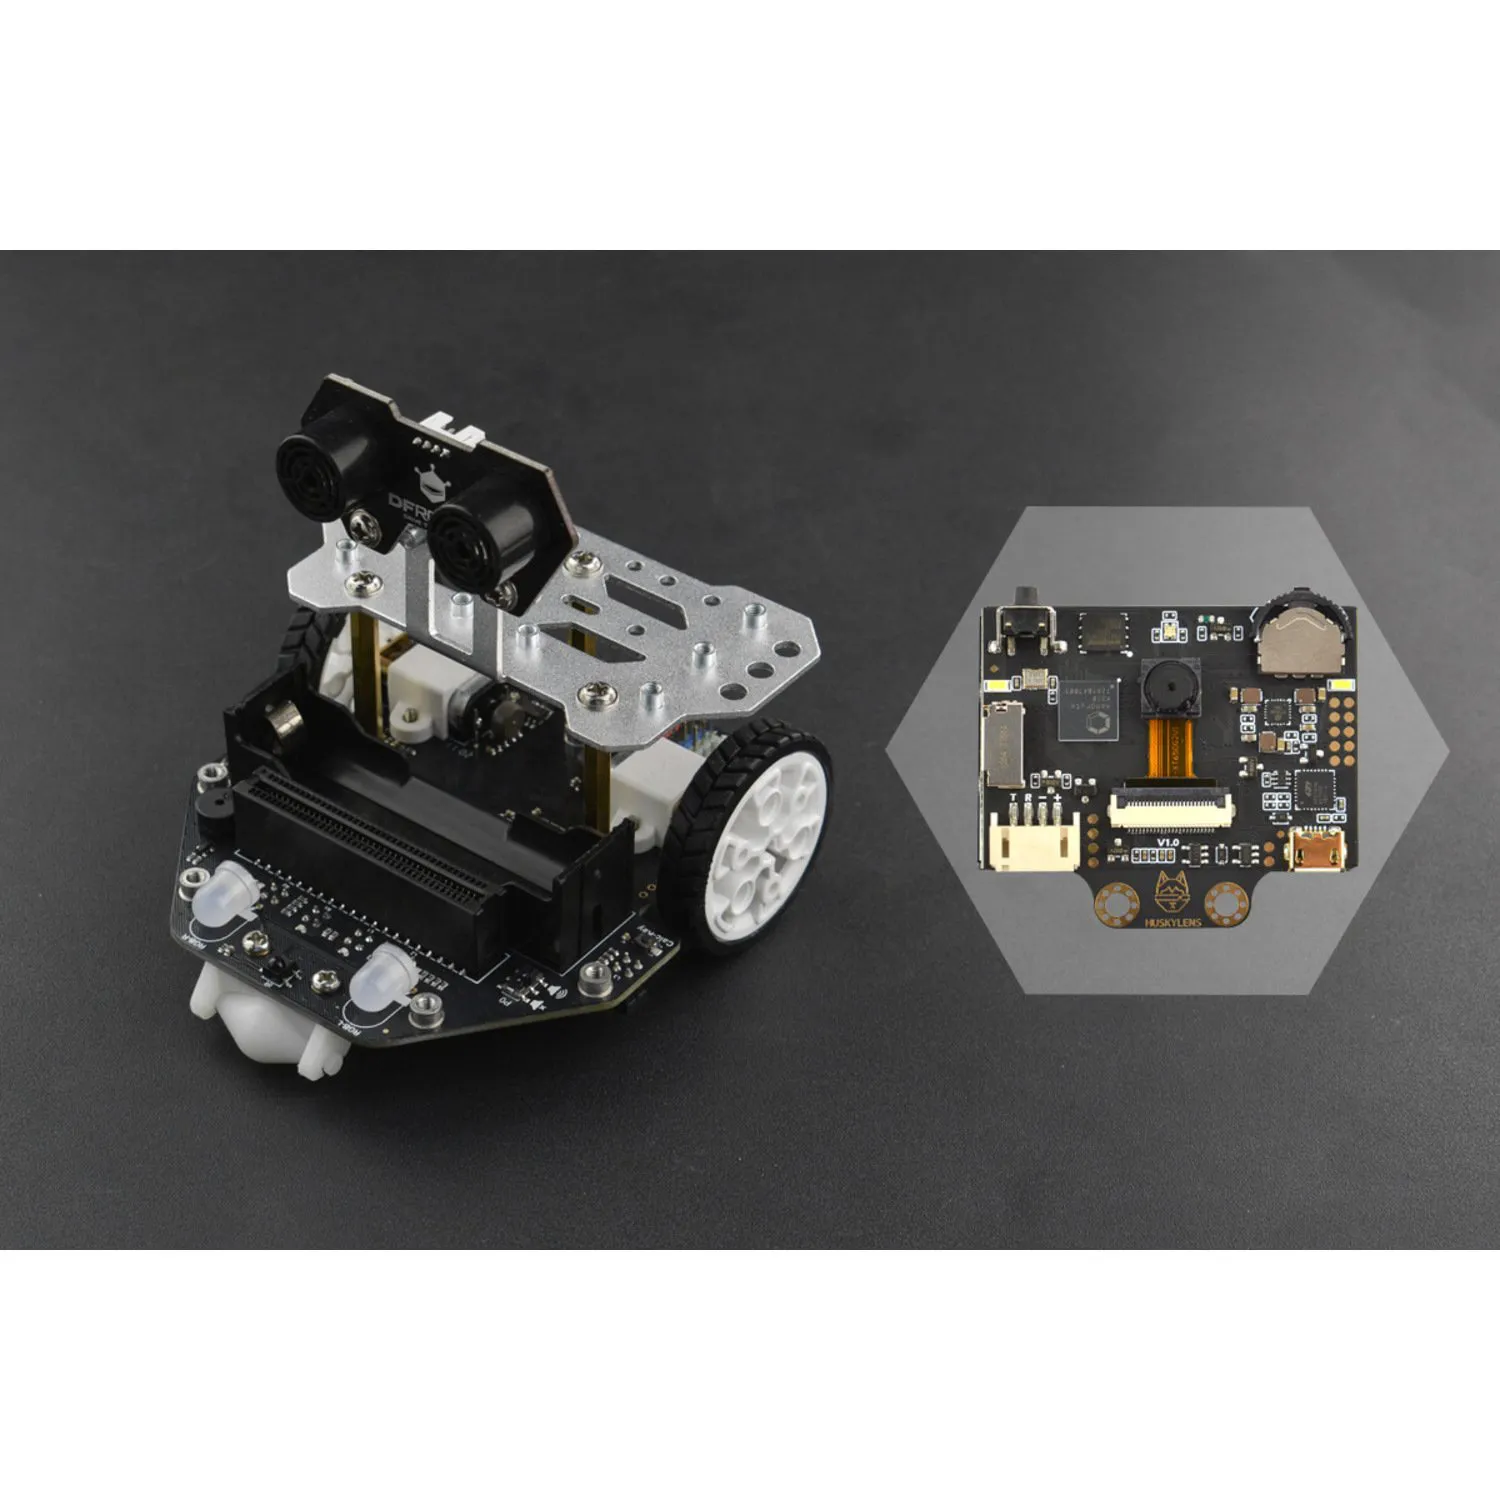 Photo of micro:Maqueen Plus - an Advanced STEM Education Robot for micro:bit